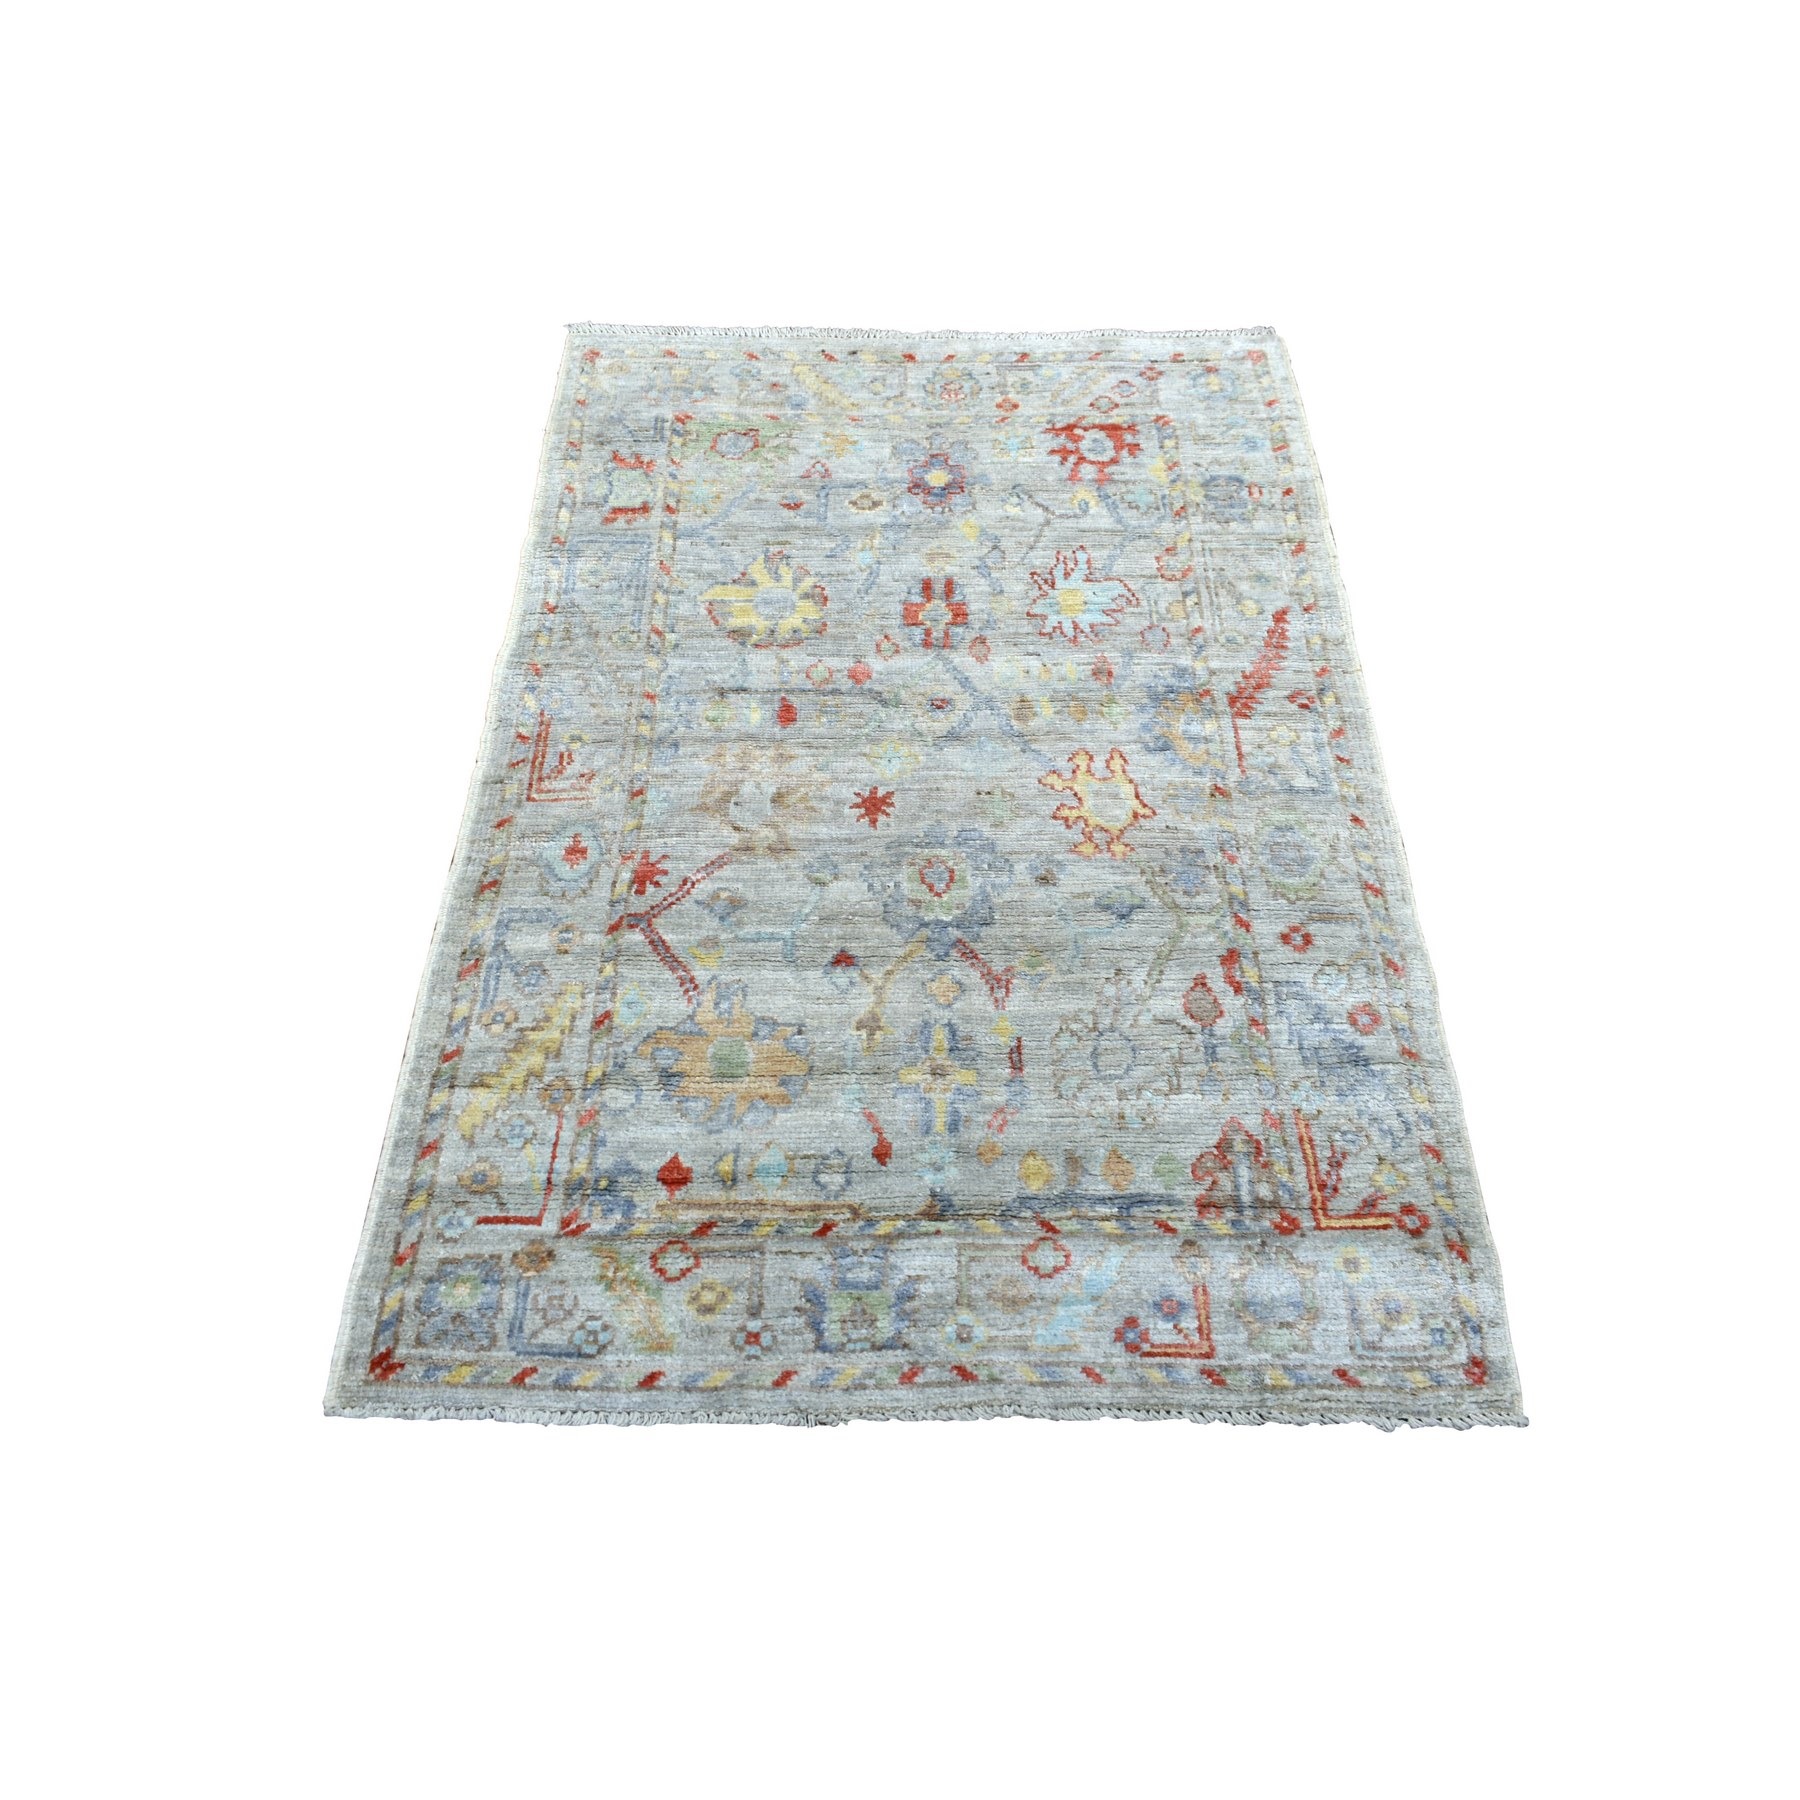 3'1"x4'8" Silver Gray Angora Ushak with Bold Floral Pattern Natural Wool Hand Woven Oriental Rug 